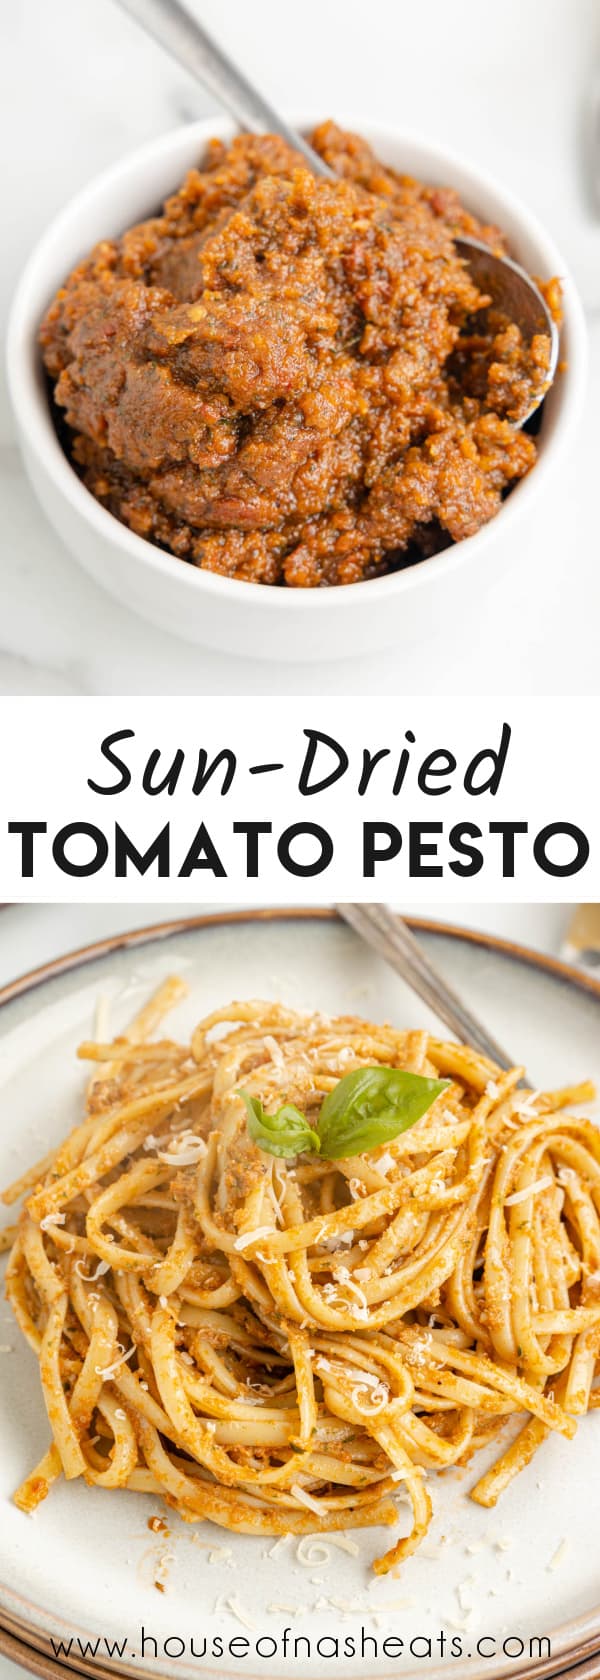 A collage of images of sun-dried tomato pesto with text overlay.